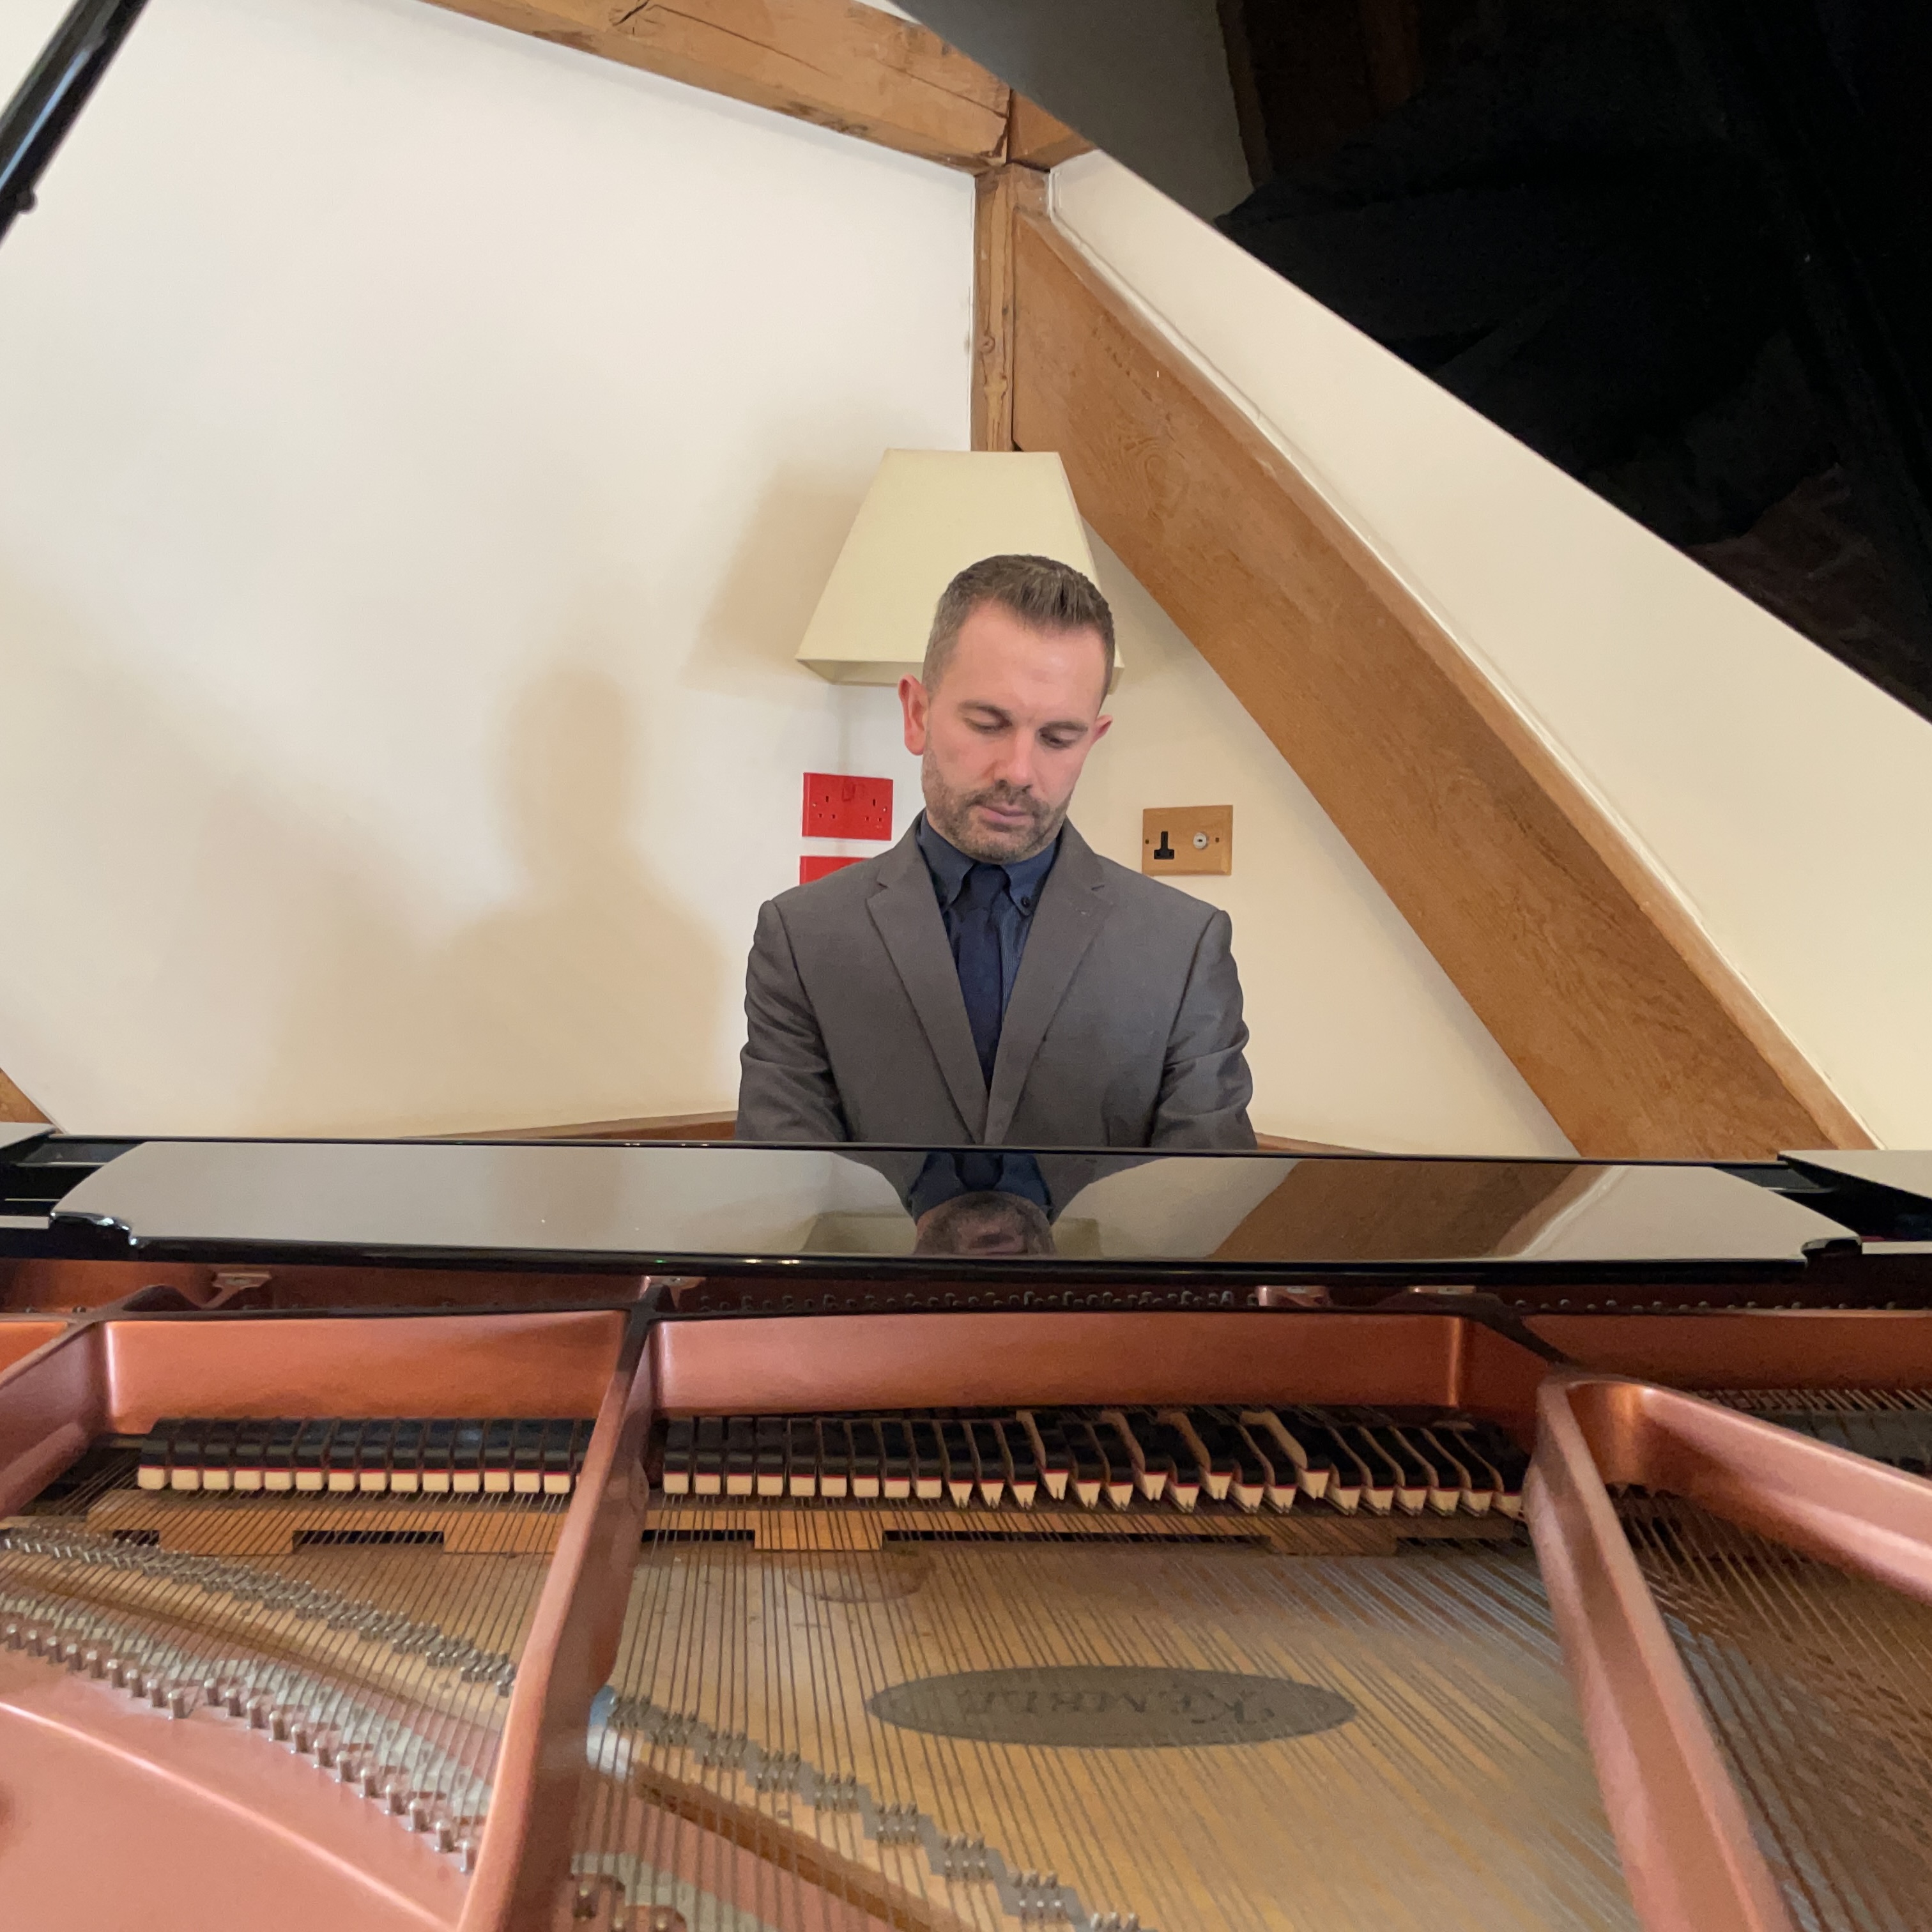 Wedding pianist for The Oaktree of Peover weddings